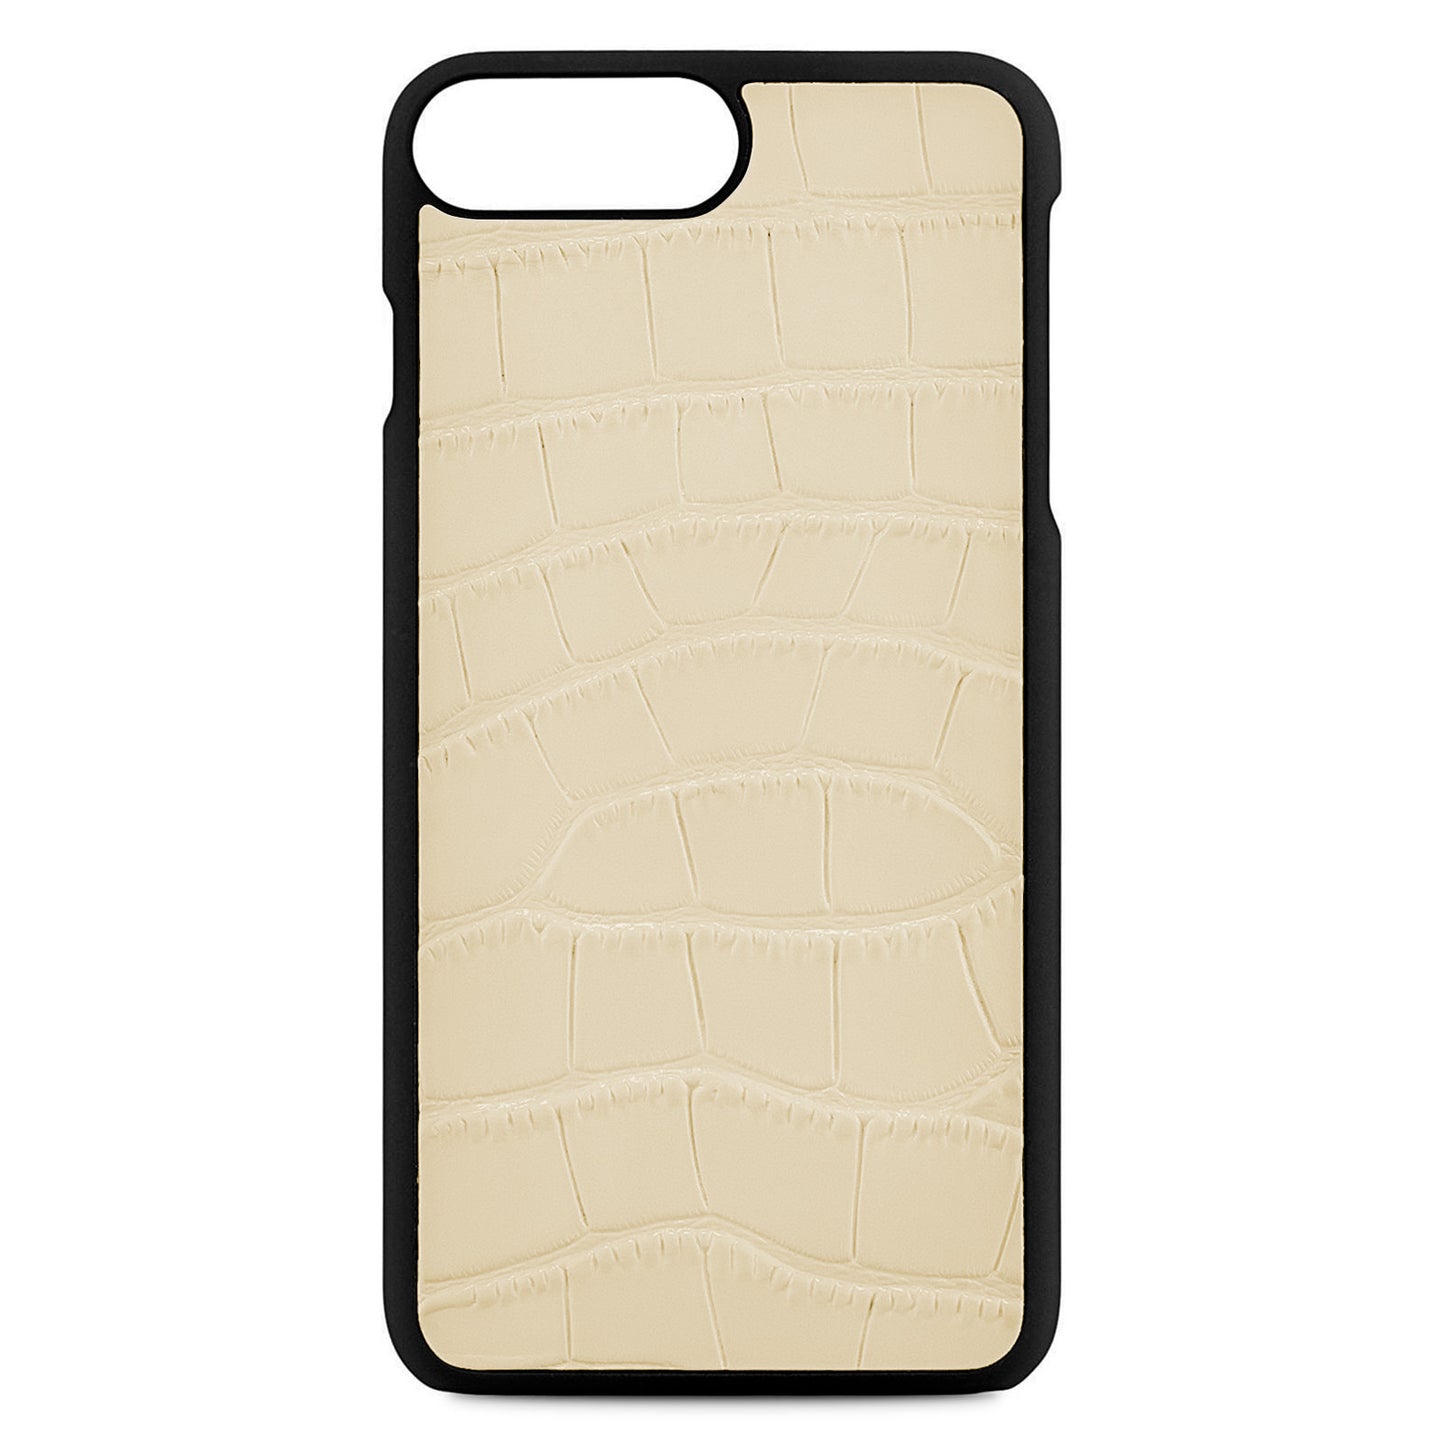 Blank Personalised Ivory Croc Leather iPhone 8 Plus Case